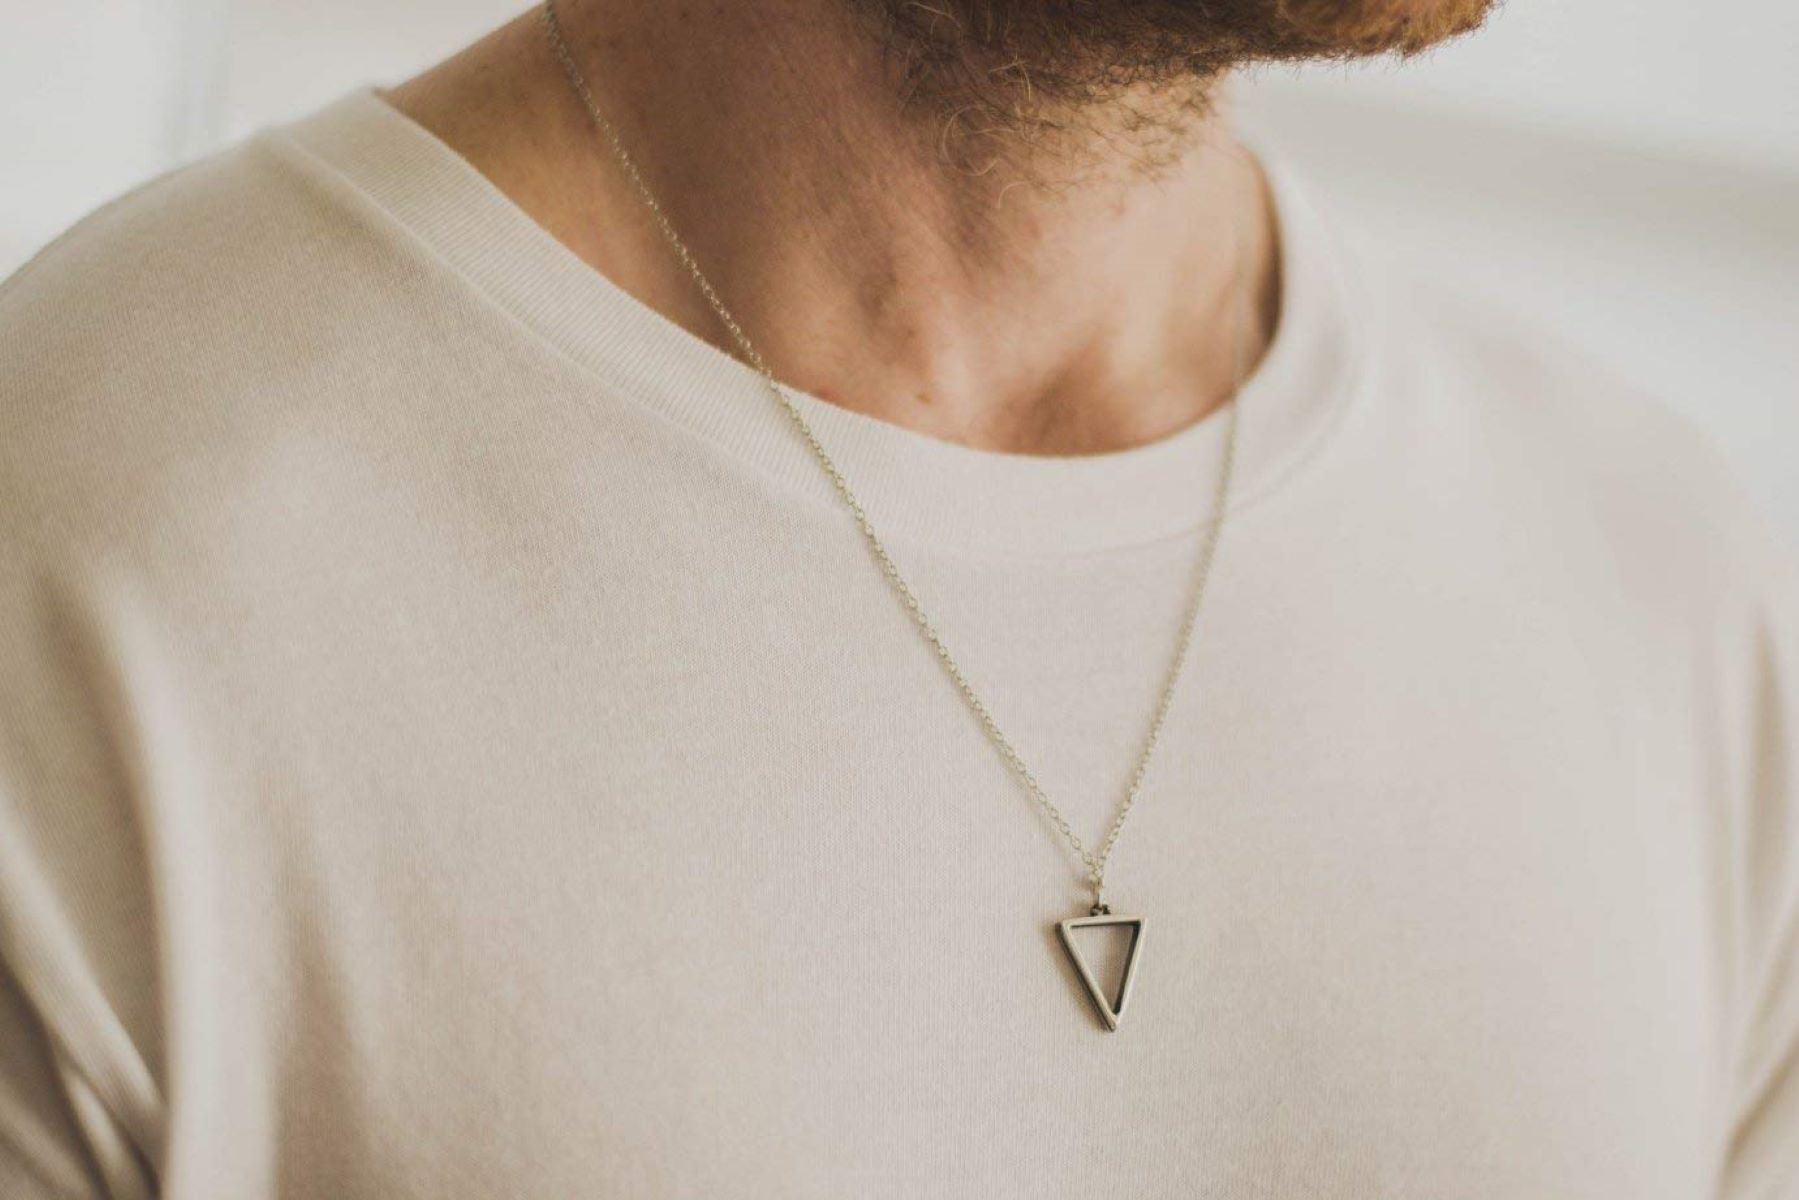 The Rise And Fall Of Men's Gold And Silver Chain Necklaces: A Fashion Trend Analysis